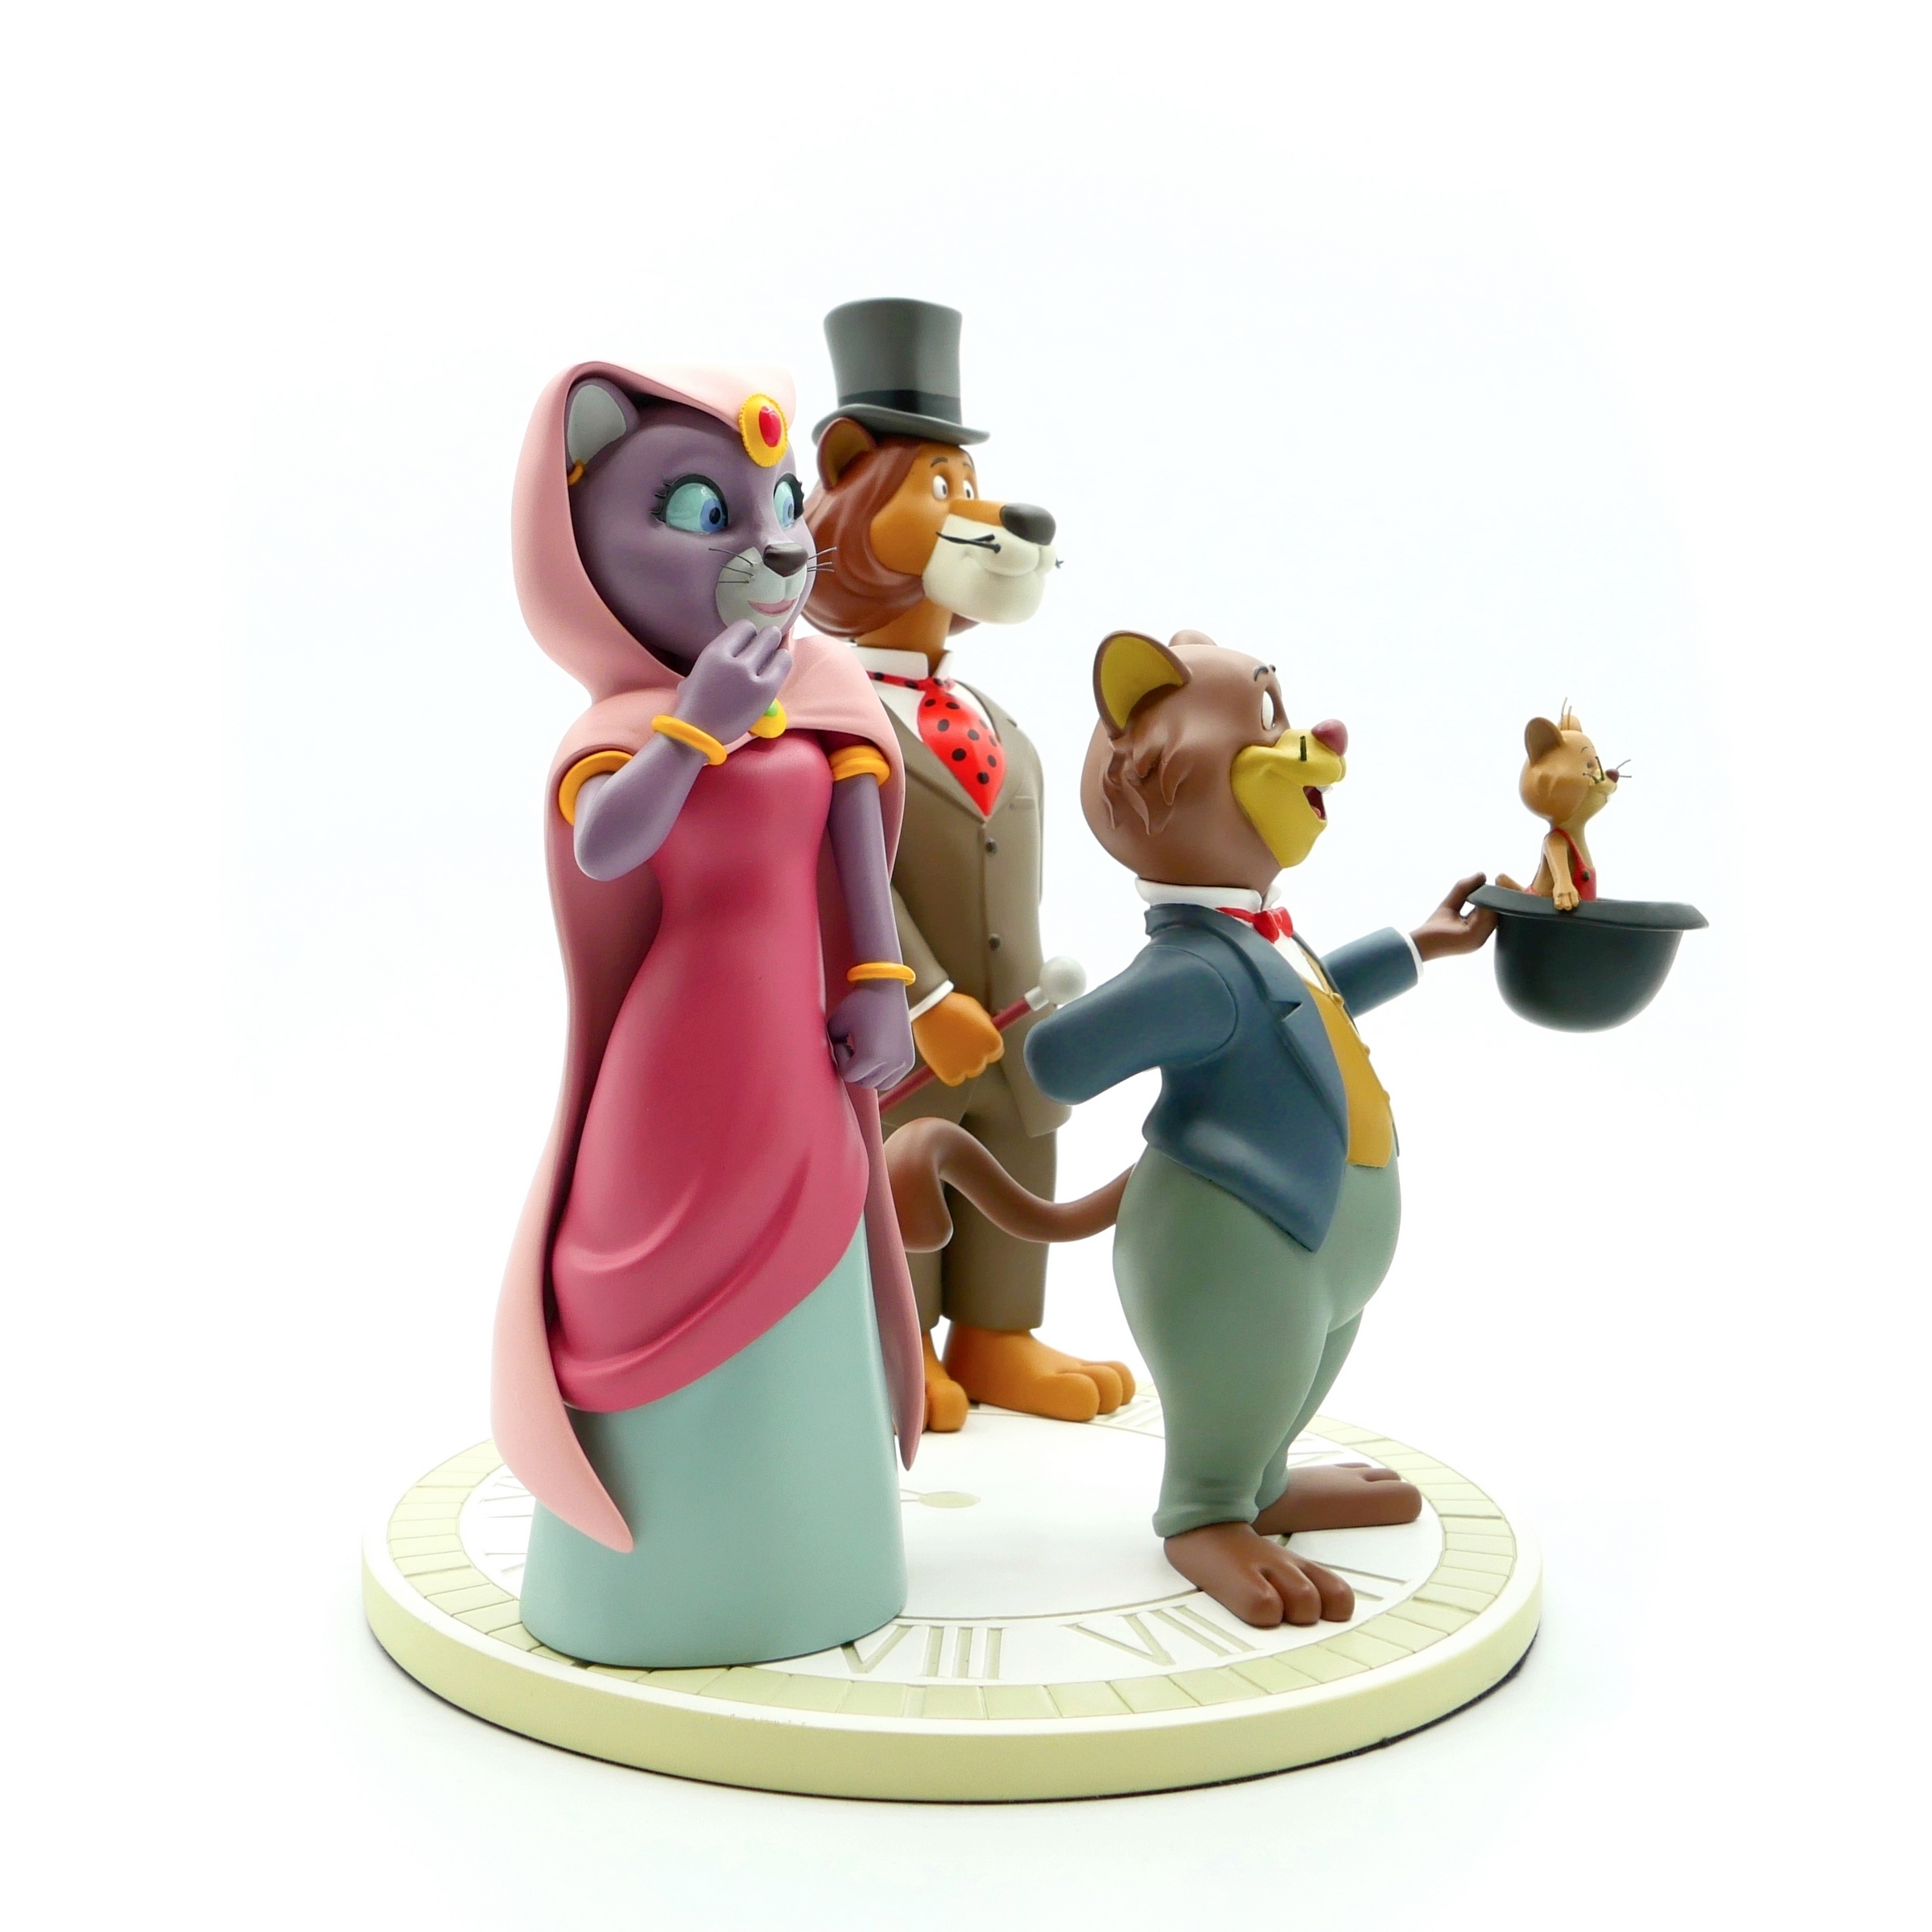 https://www.lmz-collectibles.fr/images/Image/figurine-around-world-willy-fog-lmz-collectibles-brb-1-1.jpg